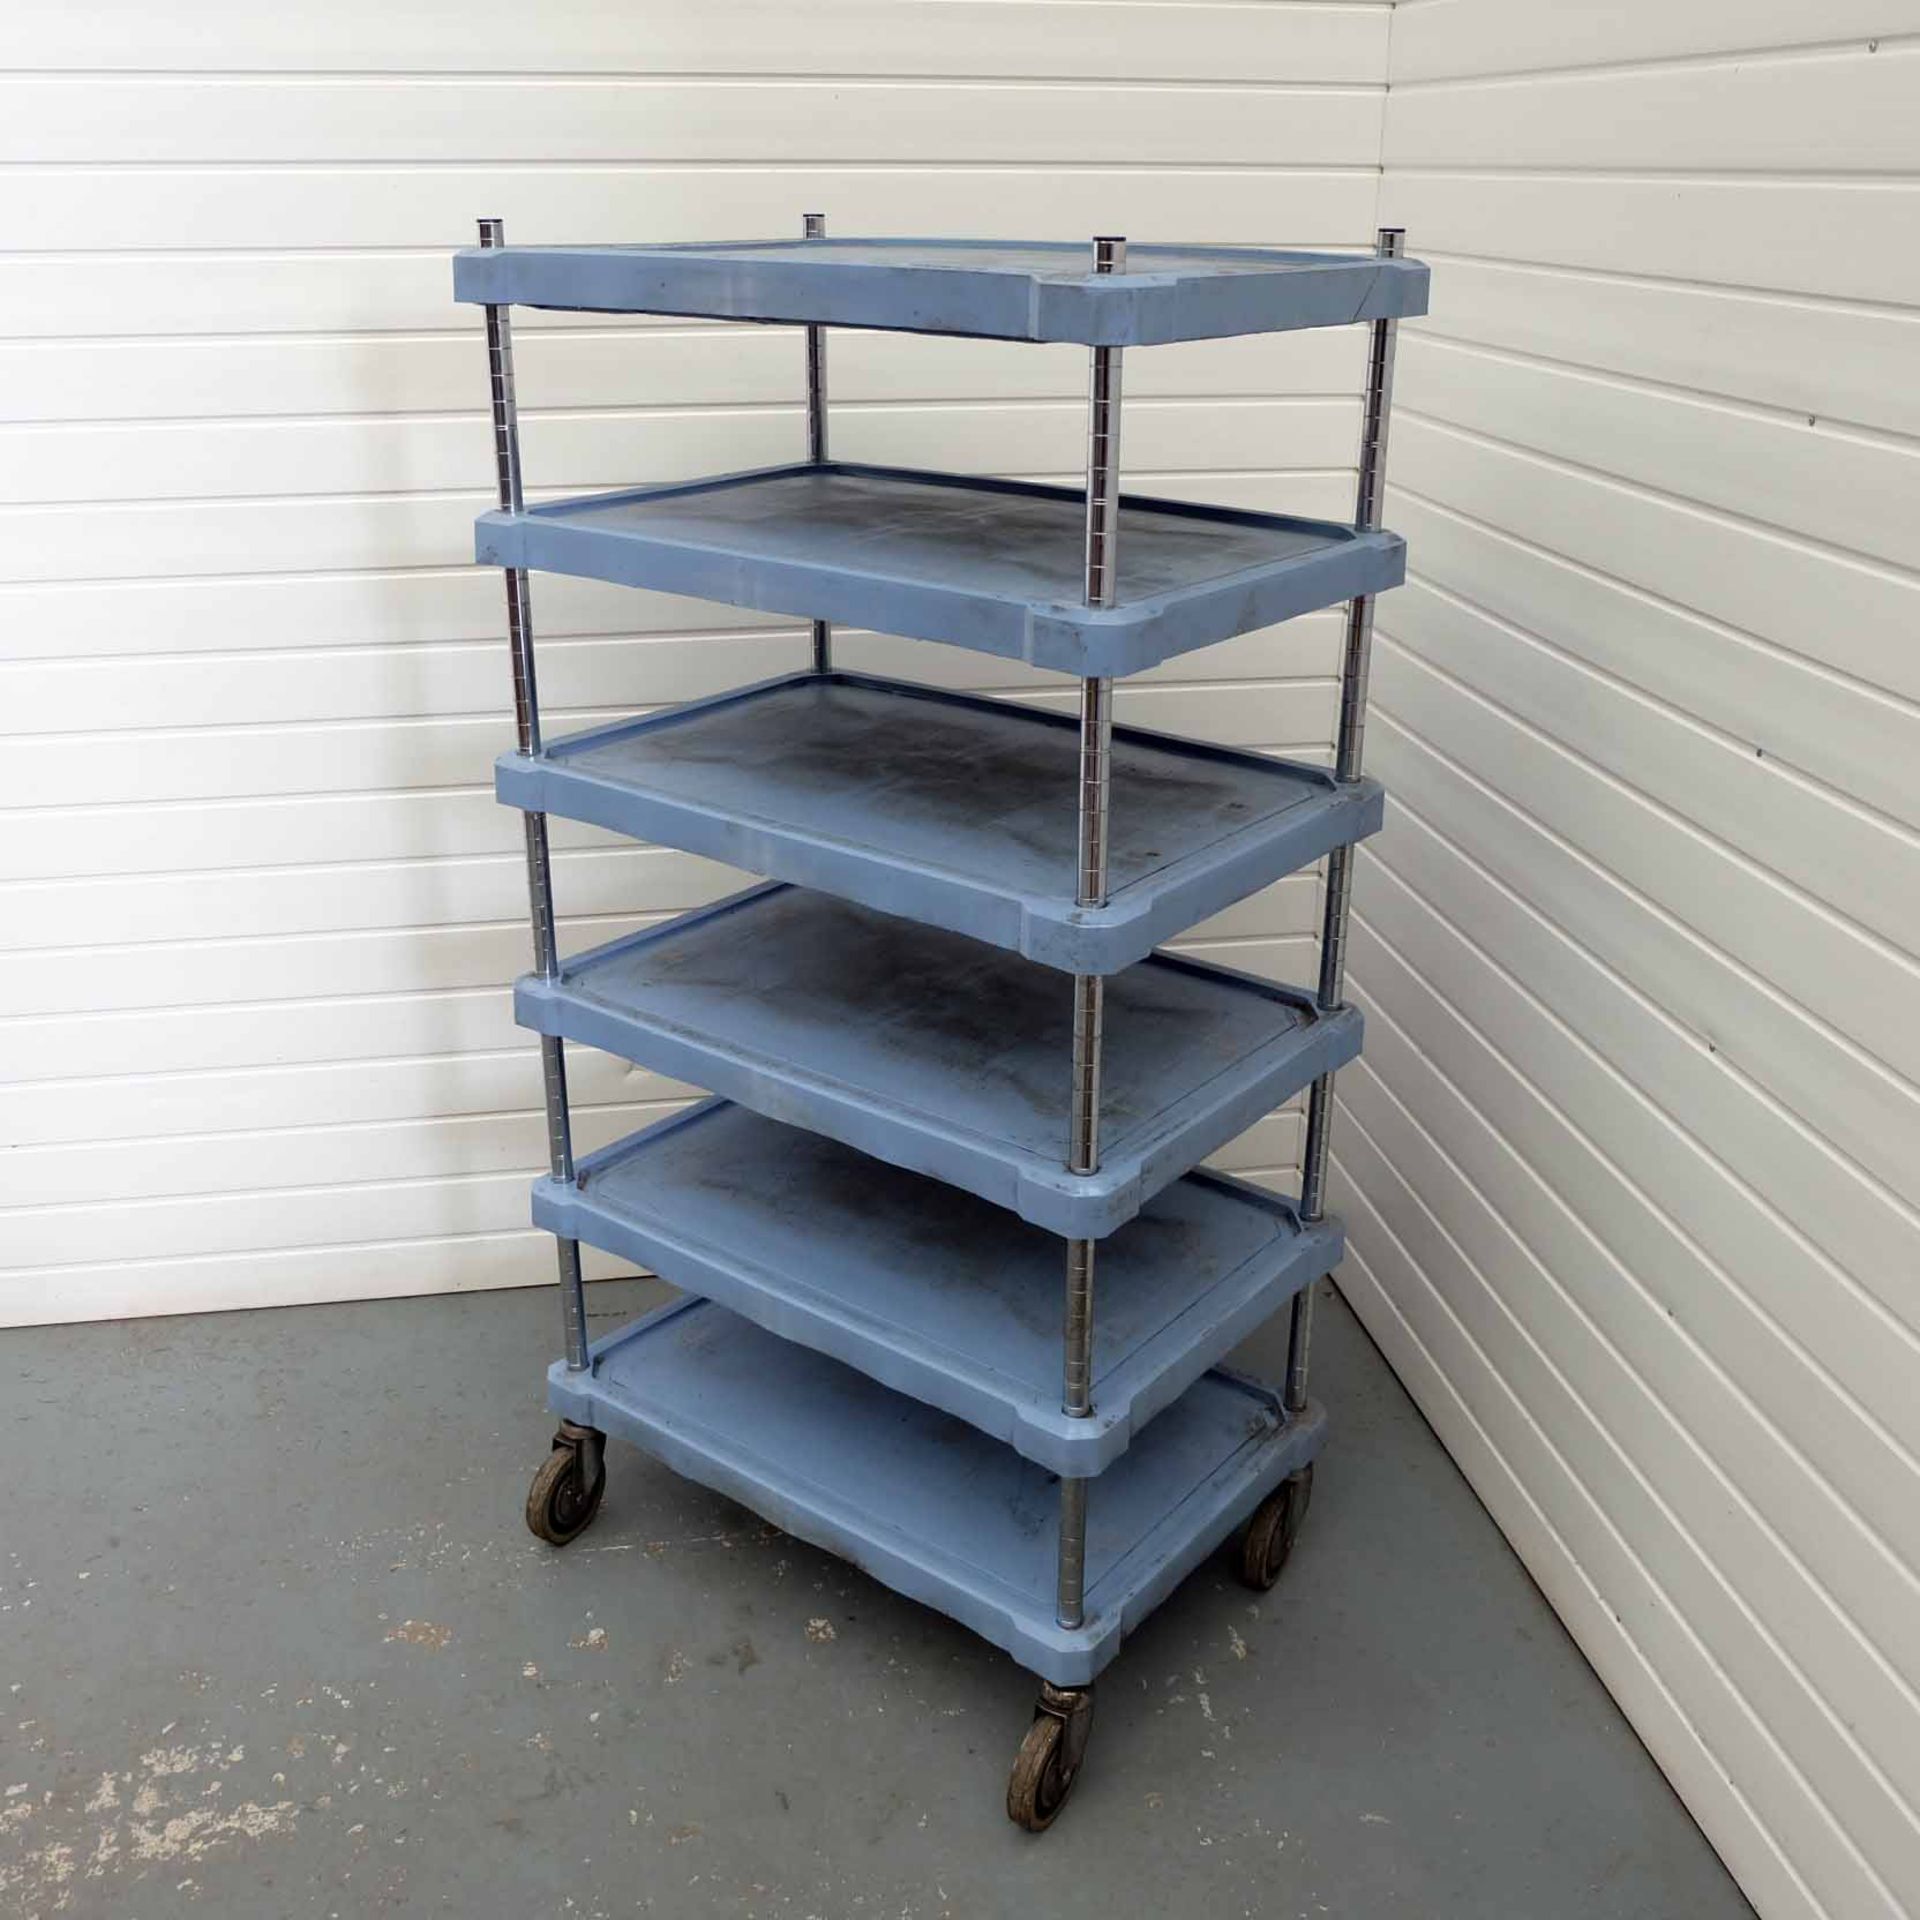 Parts Trolley With 6 Shelves. Size 795mm x 540mm x 1525mm High.